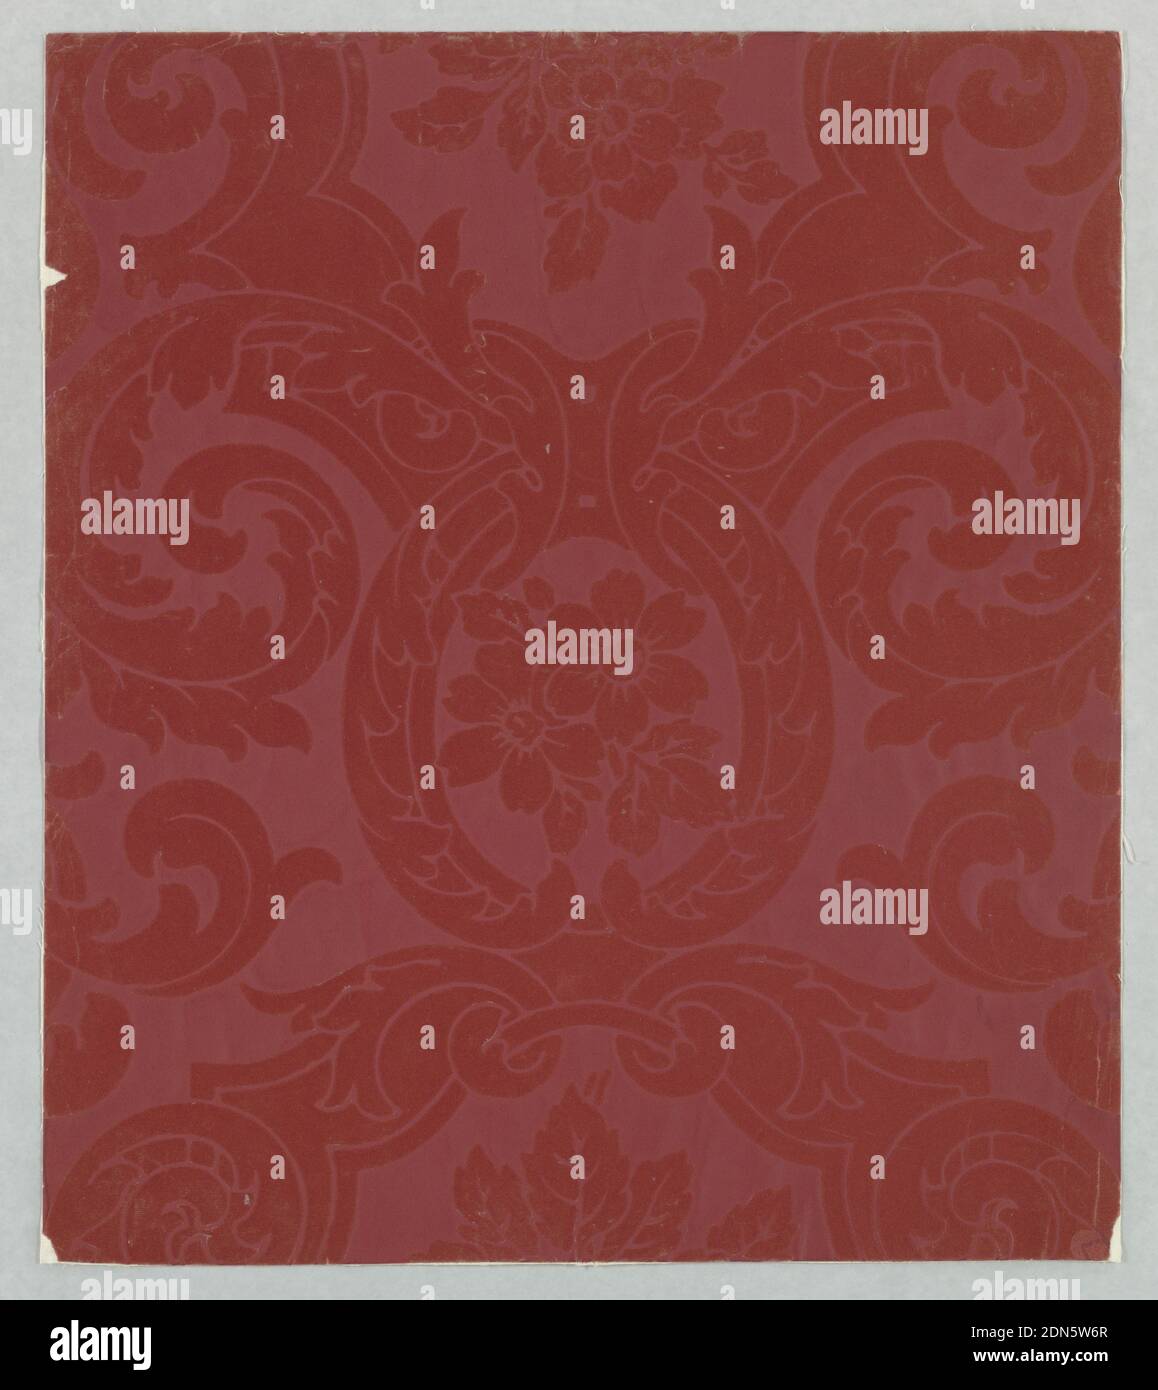 Sidewall, Block-printed, flocked, embossed, Simulates a damask design drawn in a large scale. Rococo and acanthus leaf scrolls forming medallions which contain clusters of single roses of five or six petals. Wool flock design is on a field of fine embossed horizontal lines; red two-toned wool flock on glazed embossed field., USA, 1920, Wallcoverings, Sidewall Stock Photo